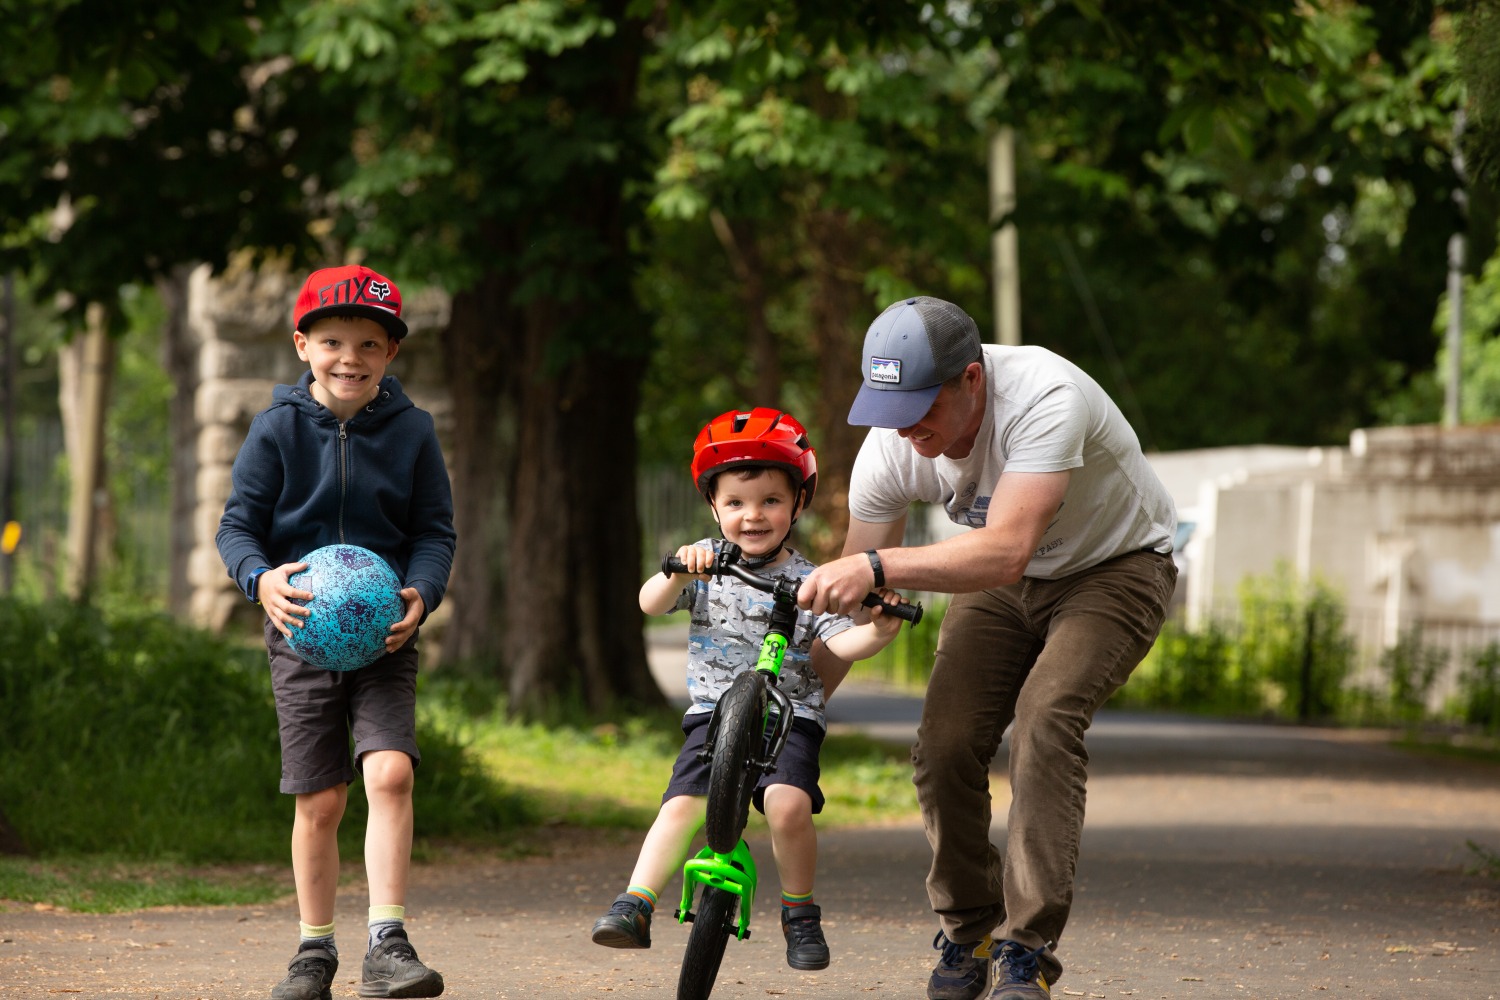 How to teach an autistic child to ride a bike: A young boy on a Kidvelo balance bike on a leafy suburb street. His dad is lifting the front of the bike to simulate a wheelie, and his brother is walking alongside him and holding a football